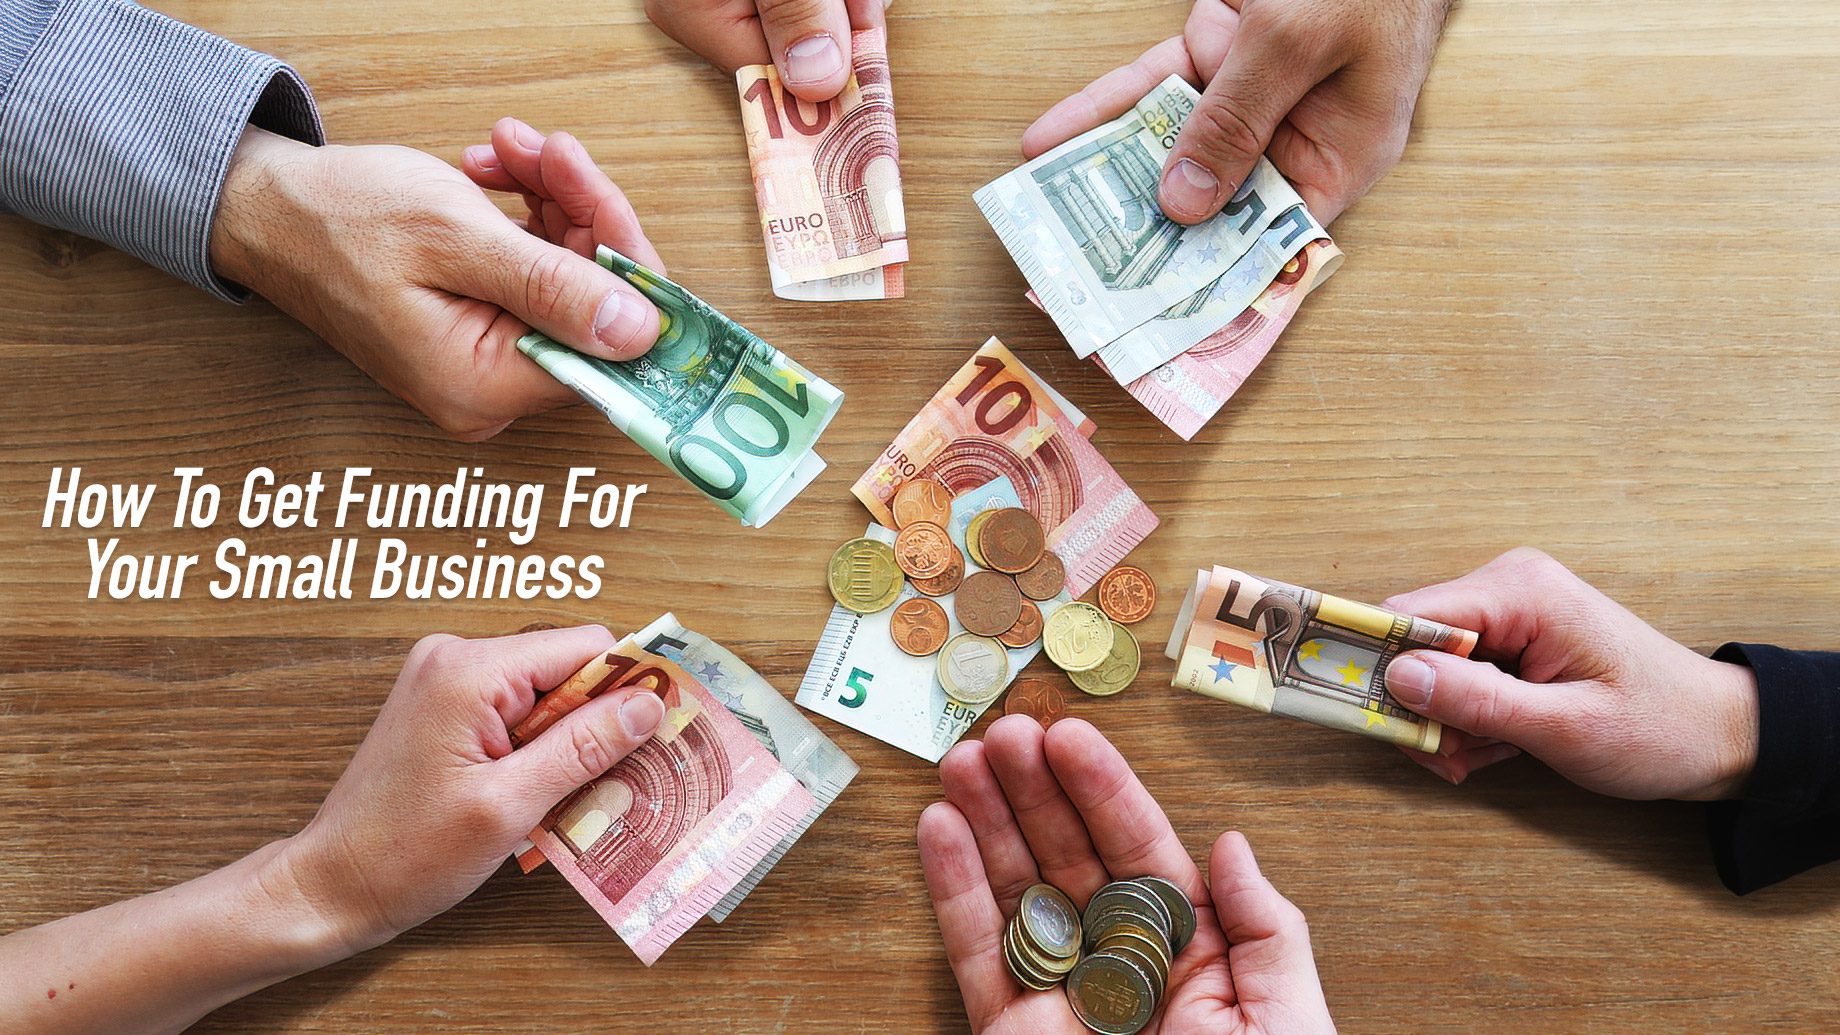 How To Get Funding For Your Small Business